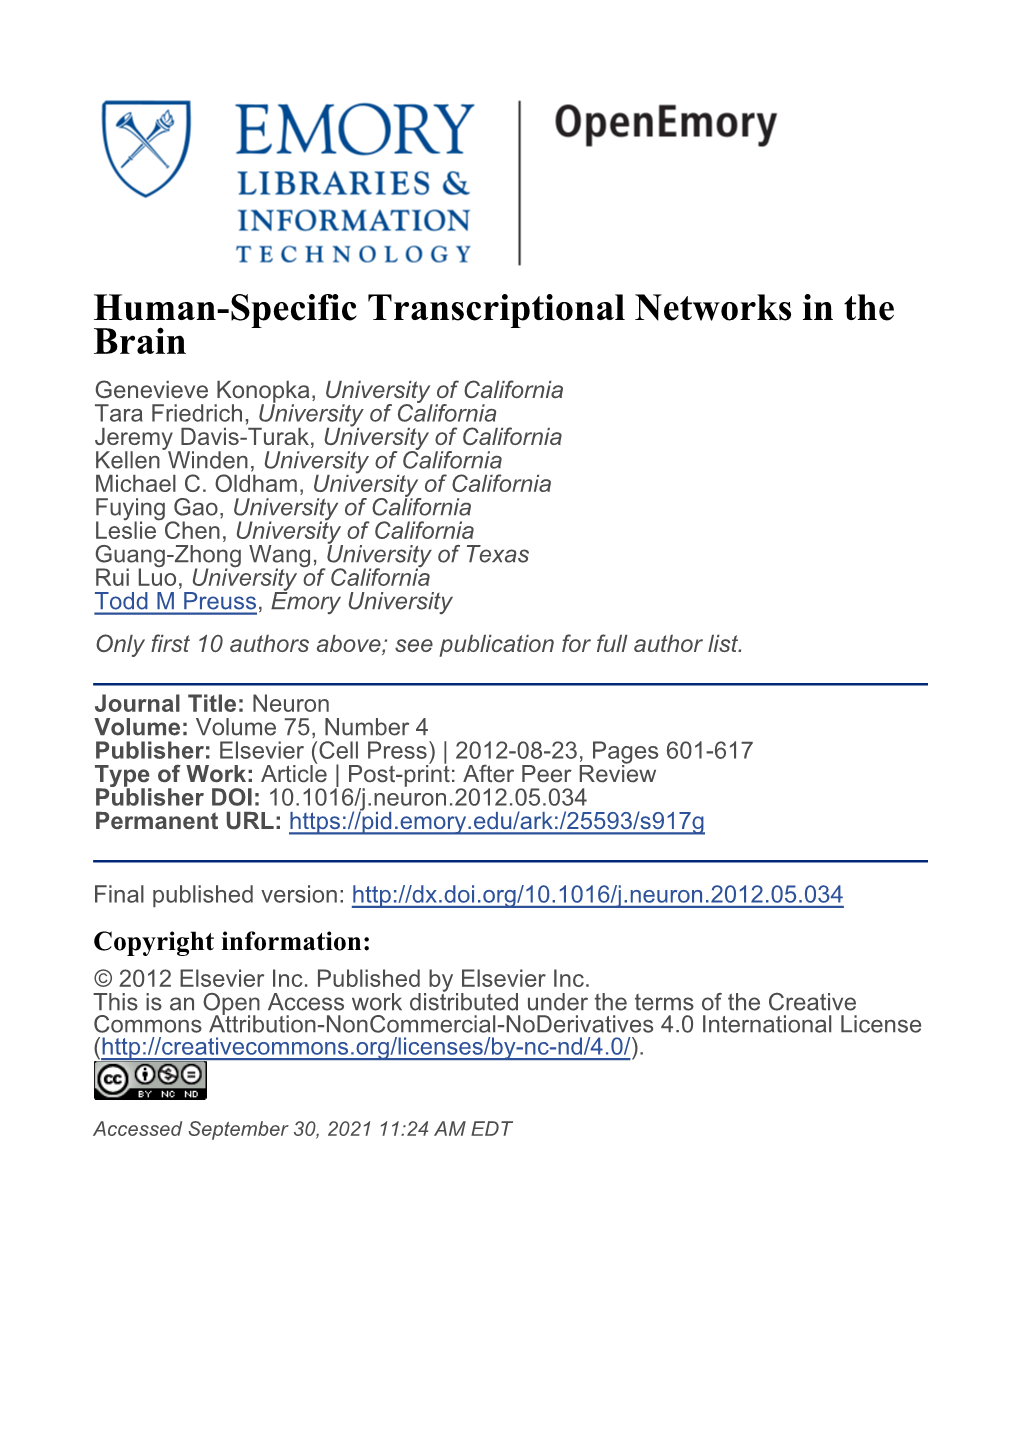 Human-Specific Transcriptional Networks in The